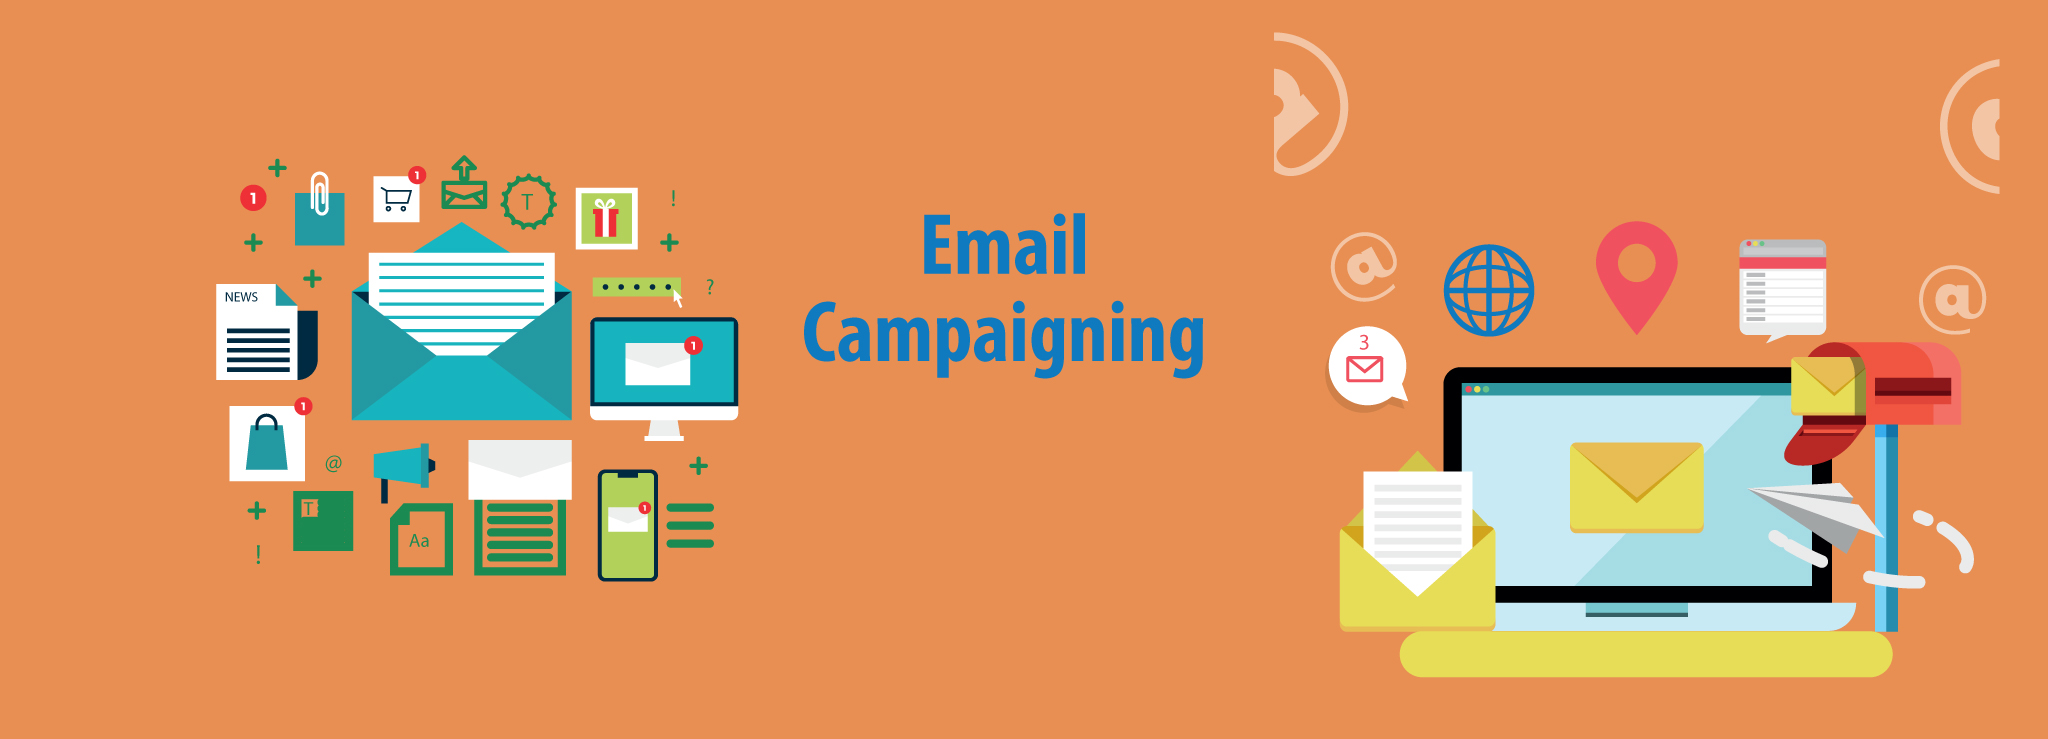 email campaigning